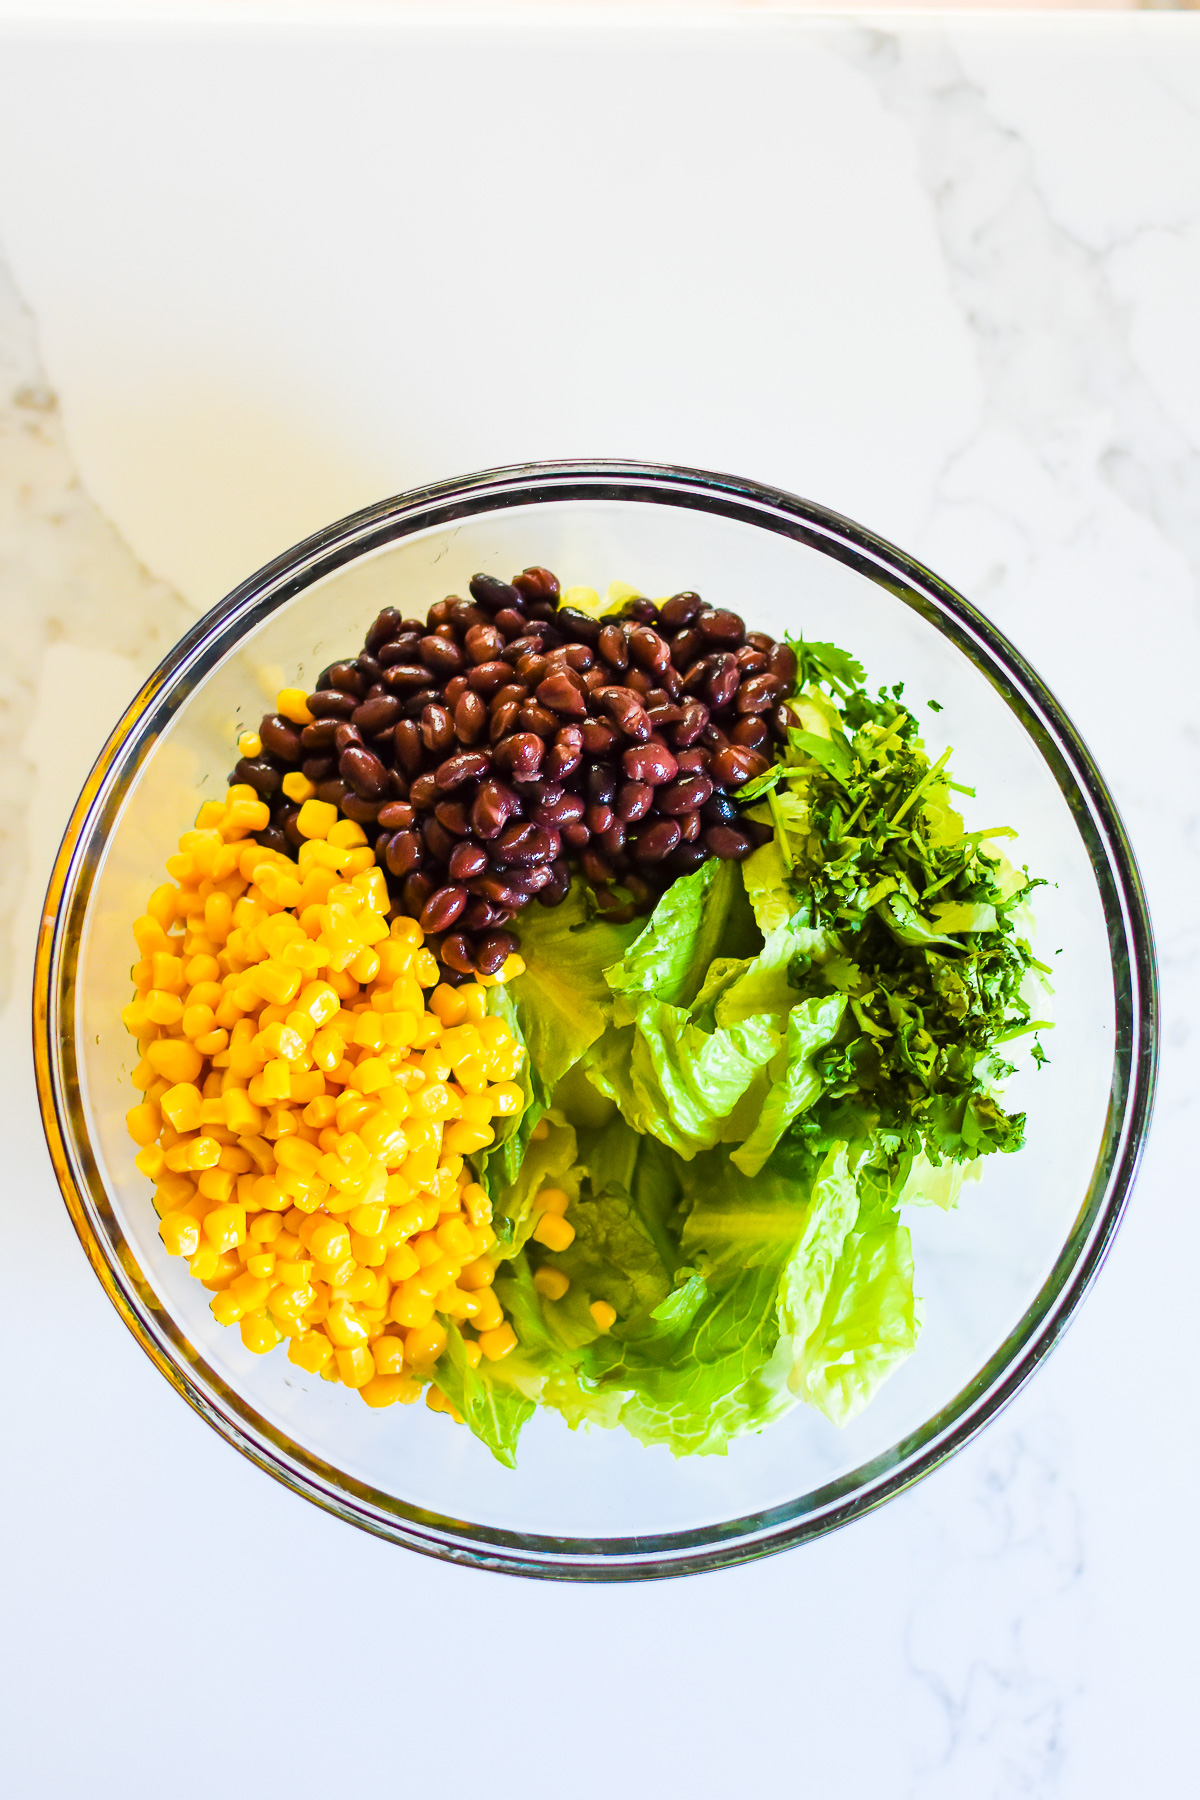 chopped romaine lettuce, corn, black beans, and cilantro in glass mixing bowl.